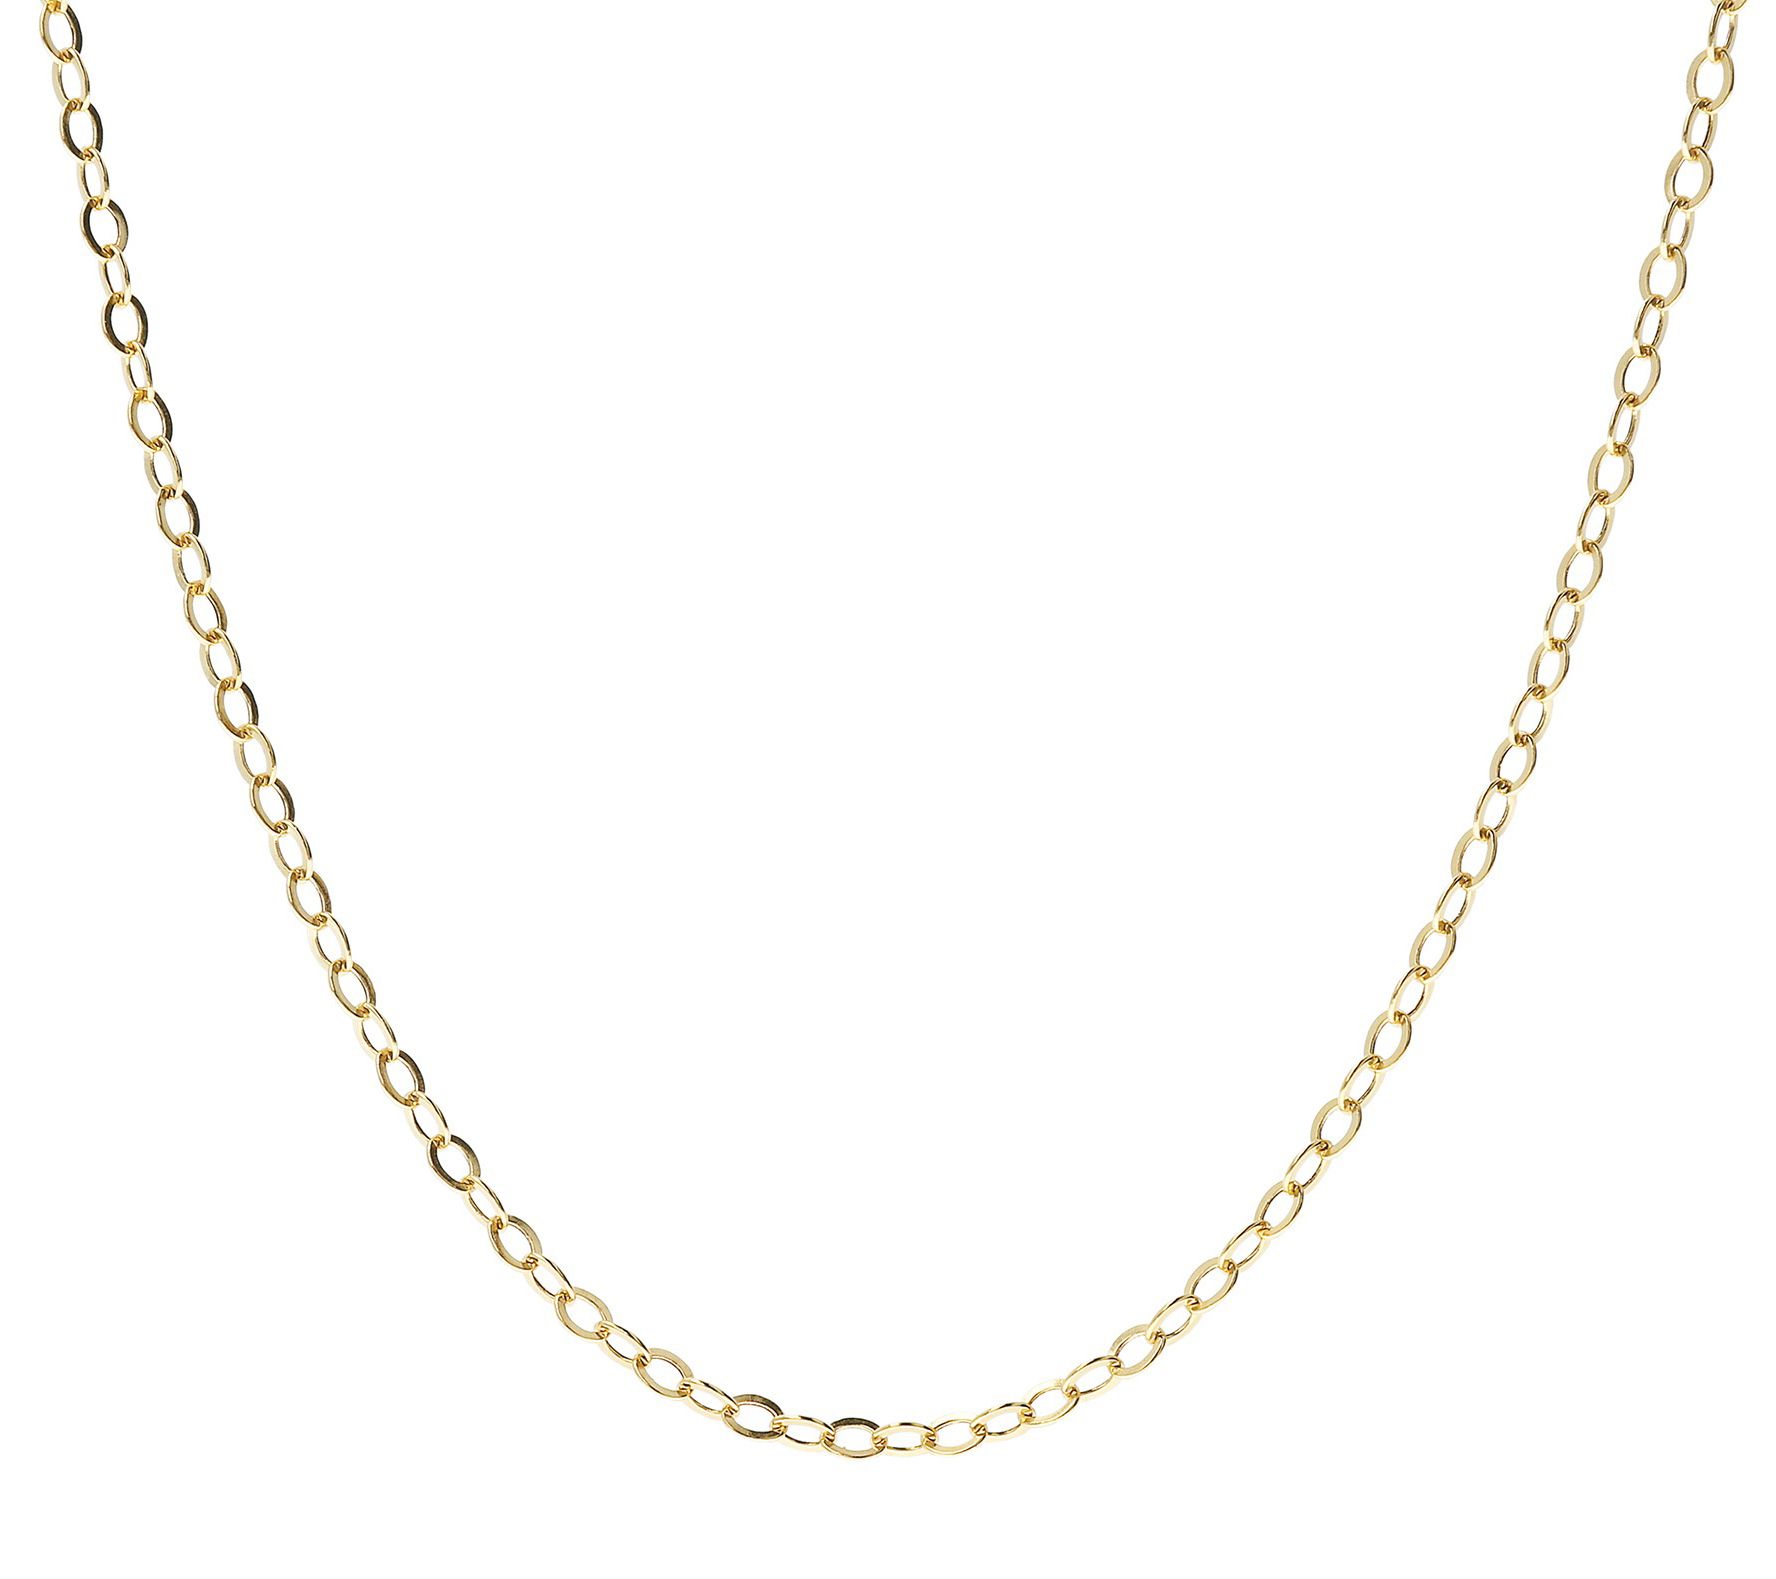 5PCS 16-18-20-22-24-26-28-30 INCH 18K Yellow Gold Filled Rolo Chain Necklaces 